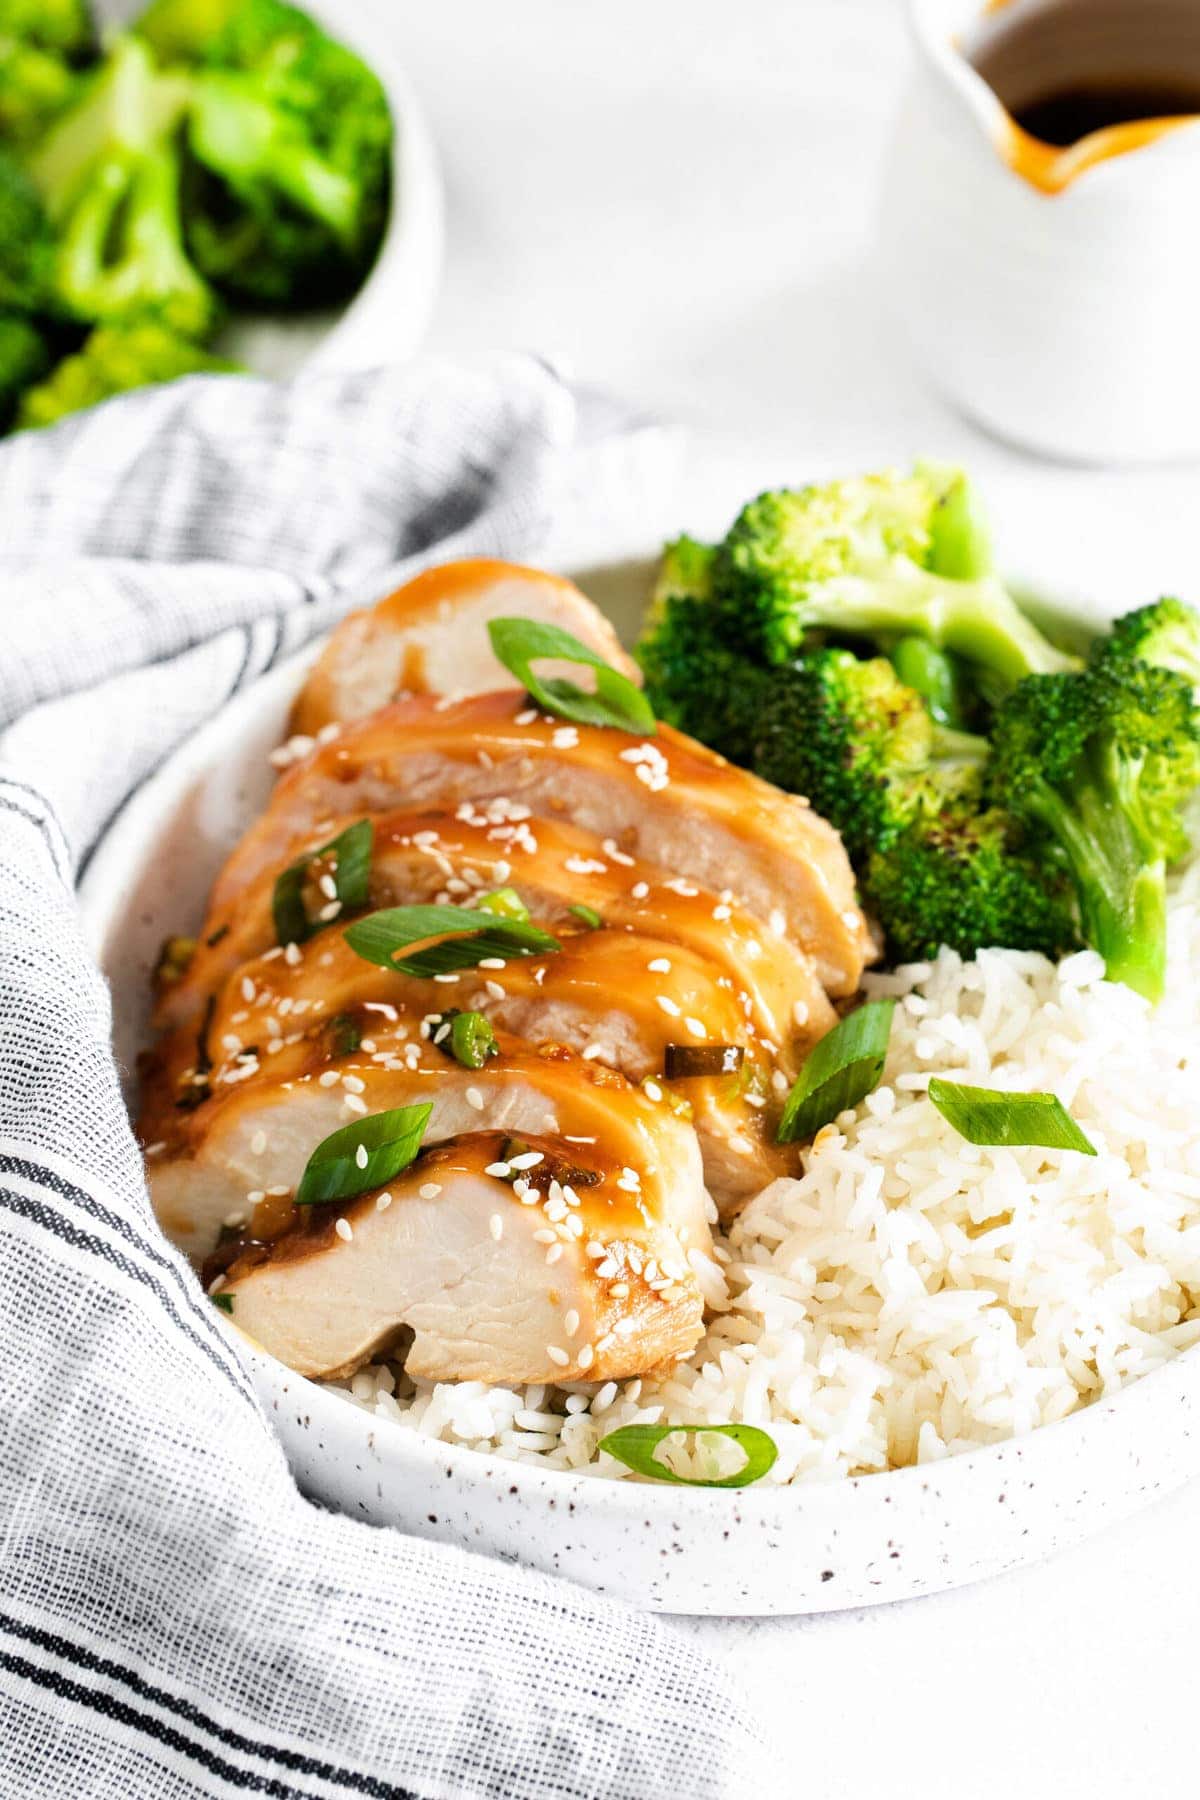 Baked Teriyaki Chicken (so saucy!) - Fit Foodie Finds